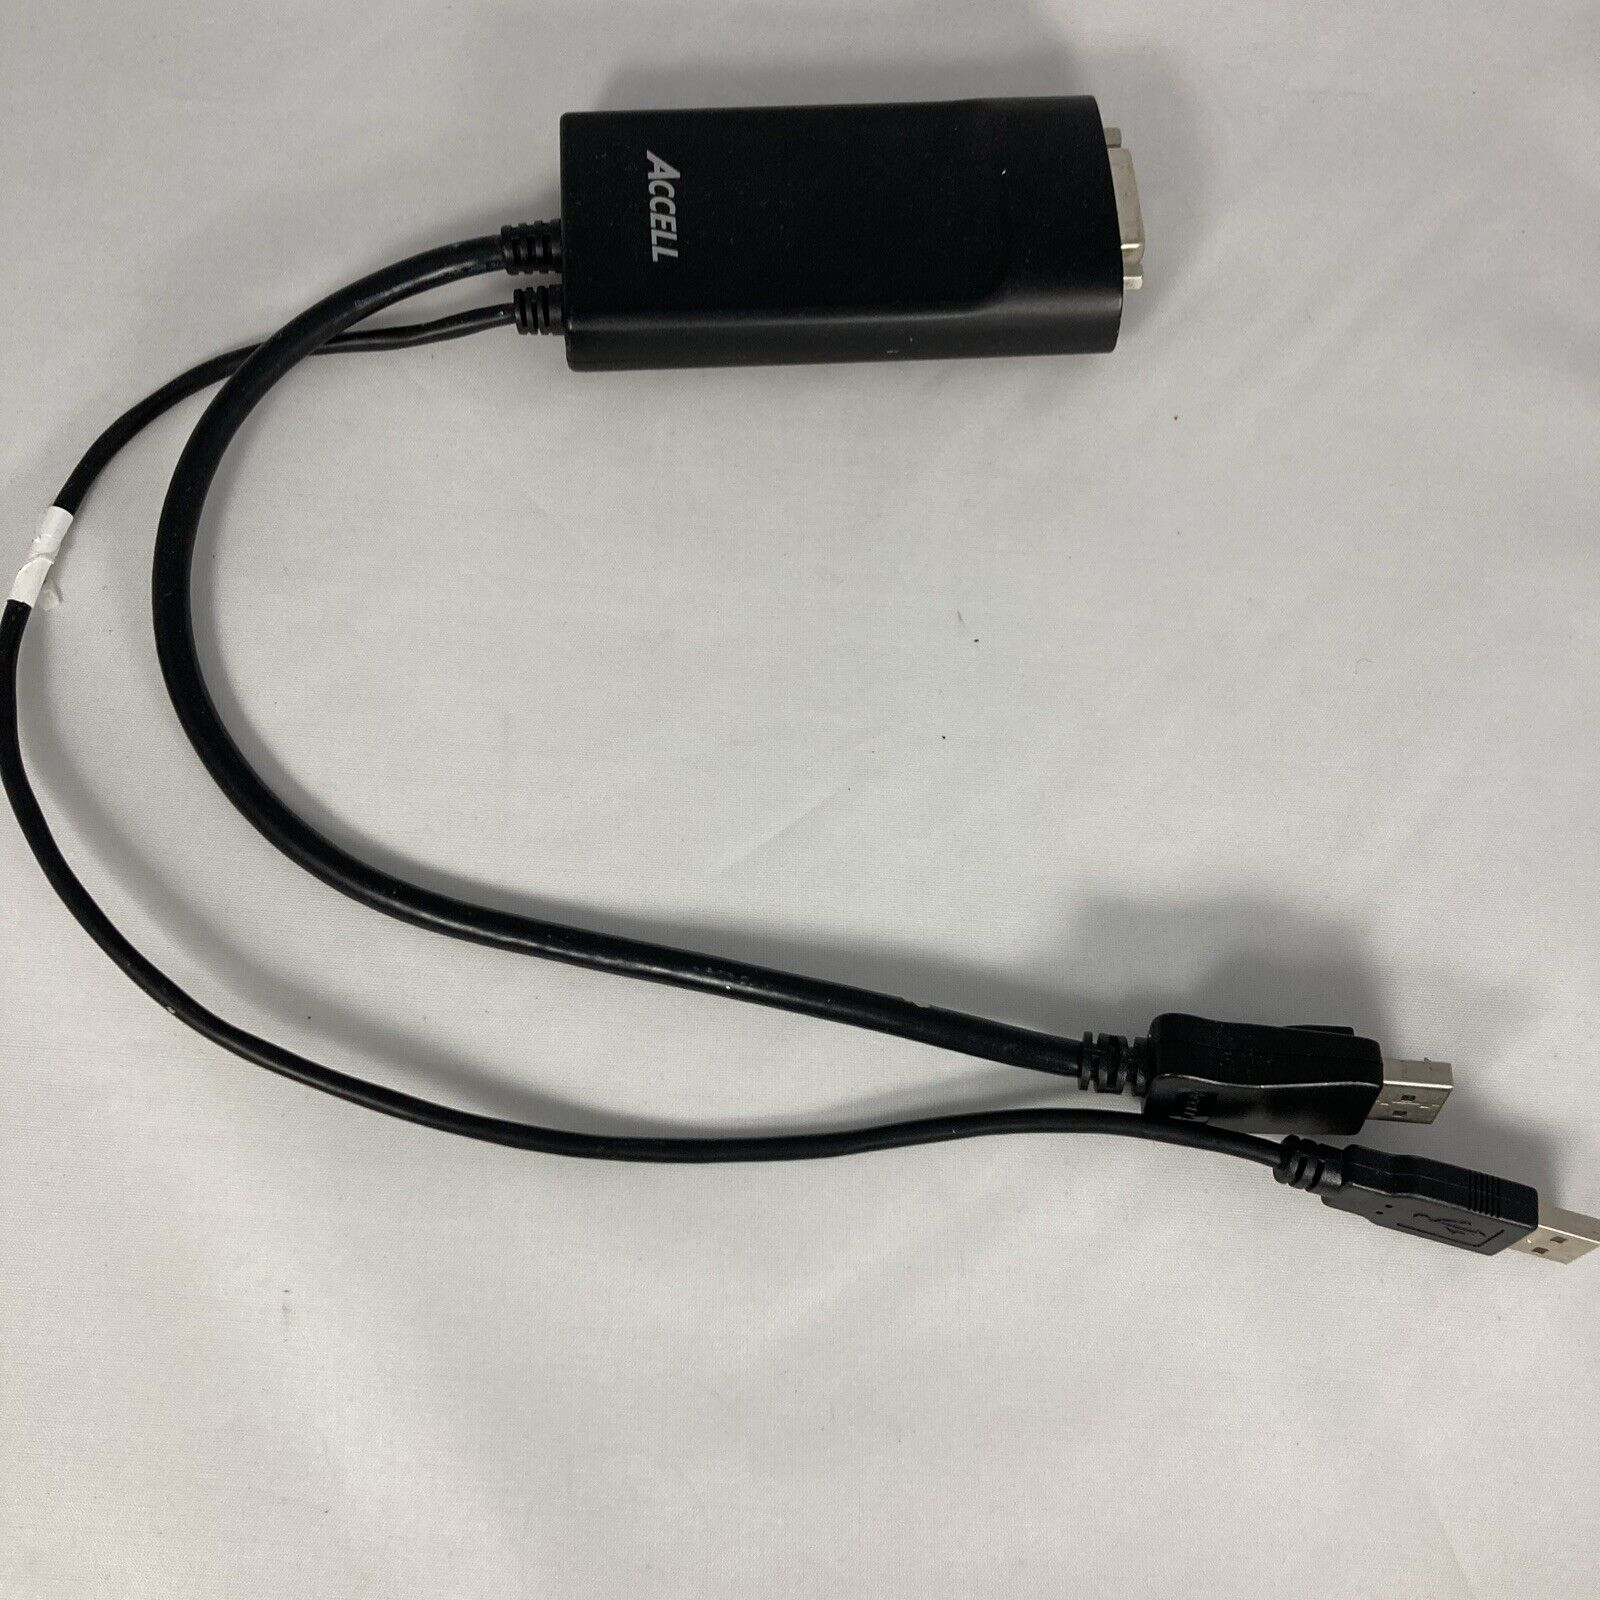 ACCELL B087B-002B ACTIVE DISPLAYPORT DP TO DVI DUAL-LINK ADAPTER